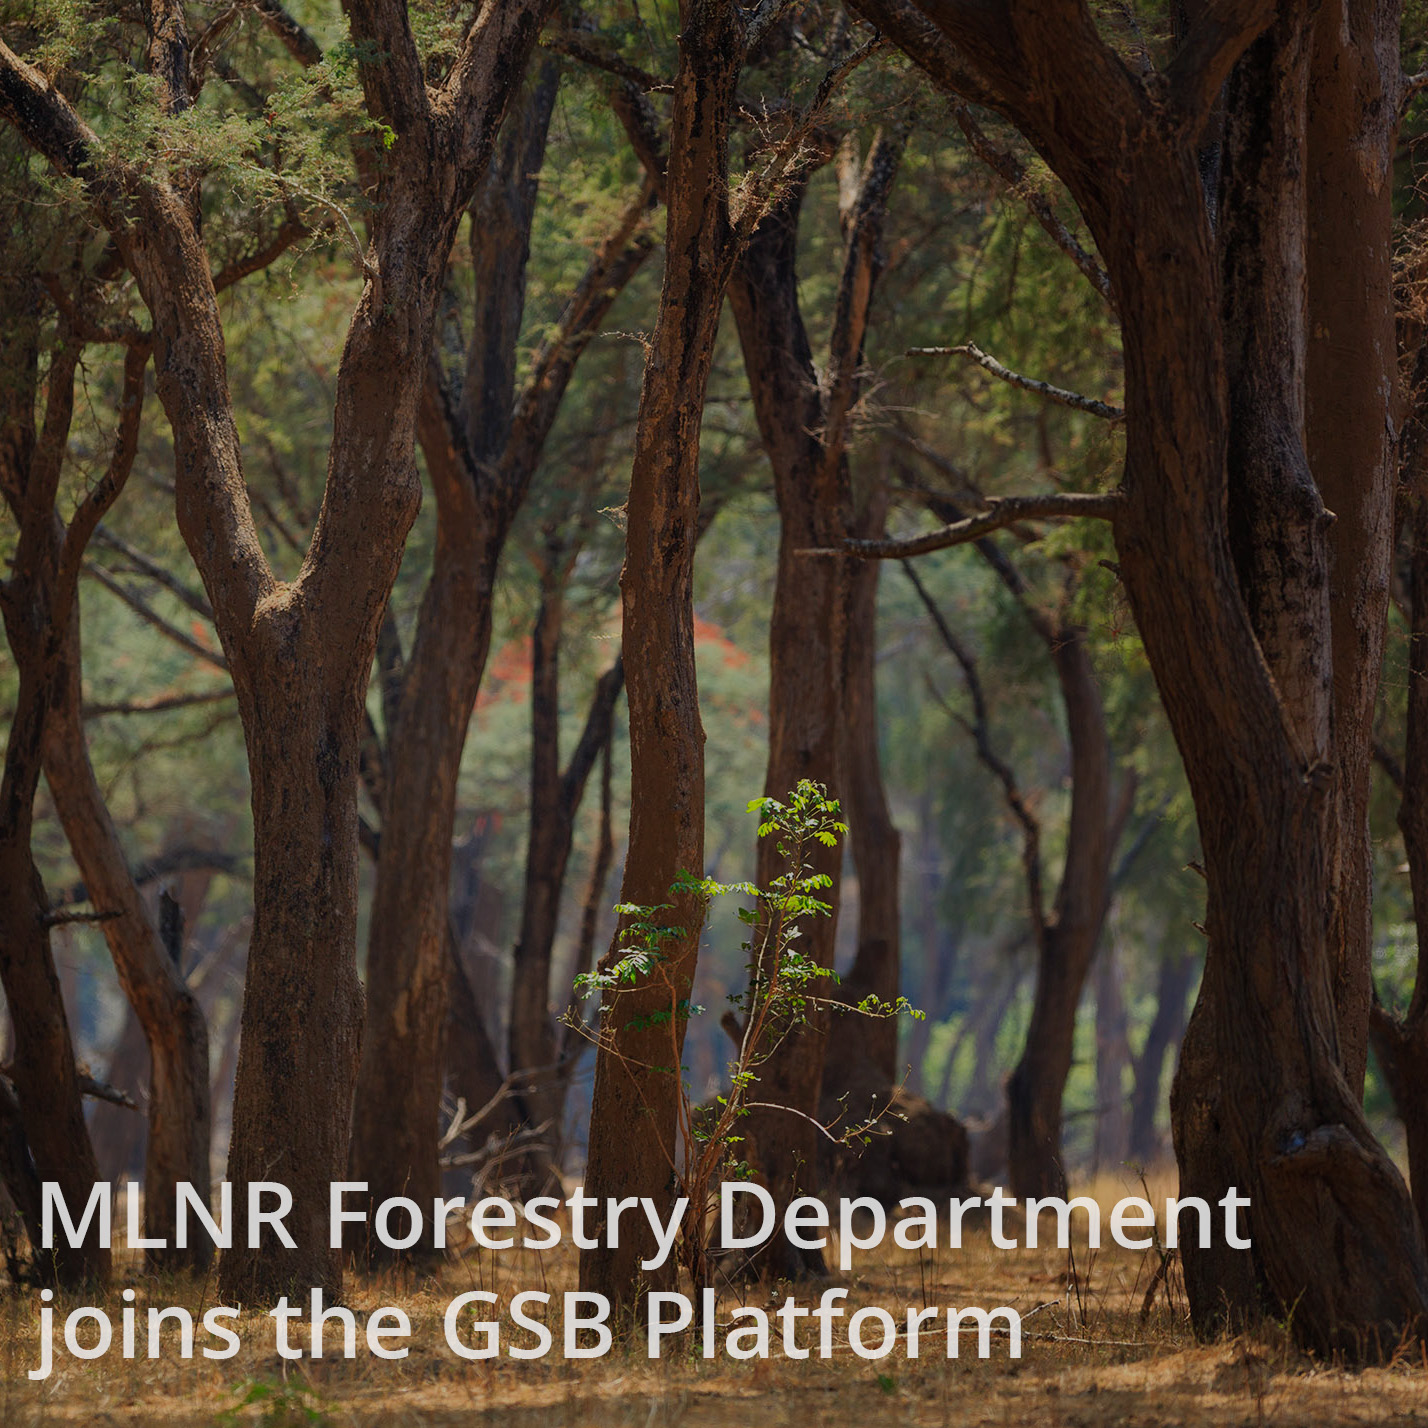 Department of Forestry joins the GSB Platform